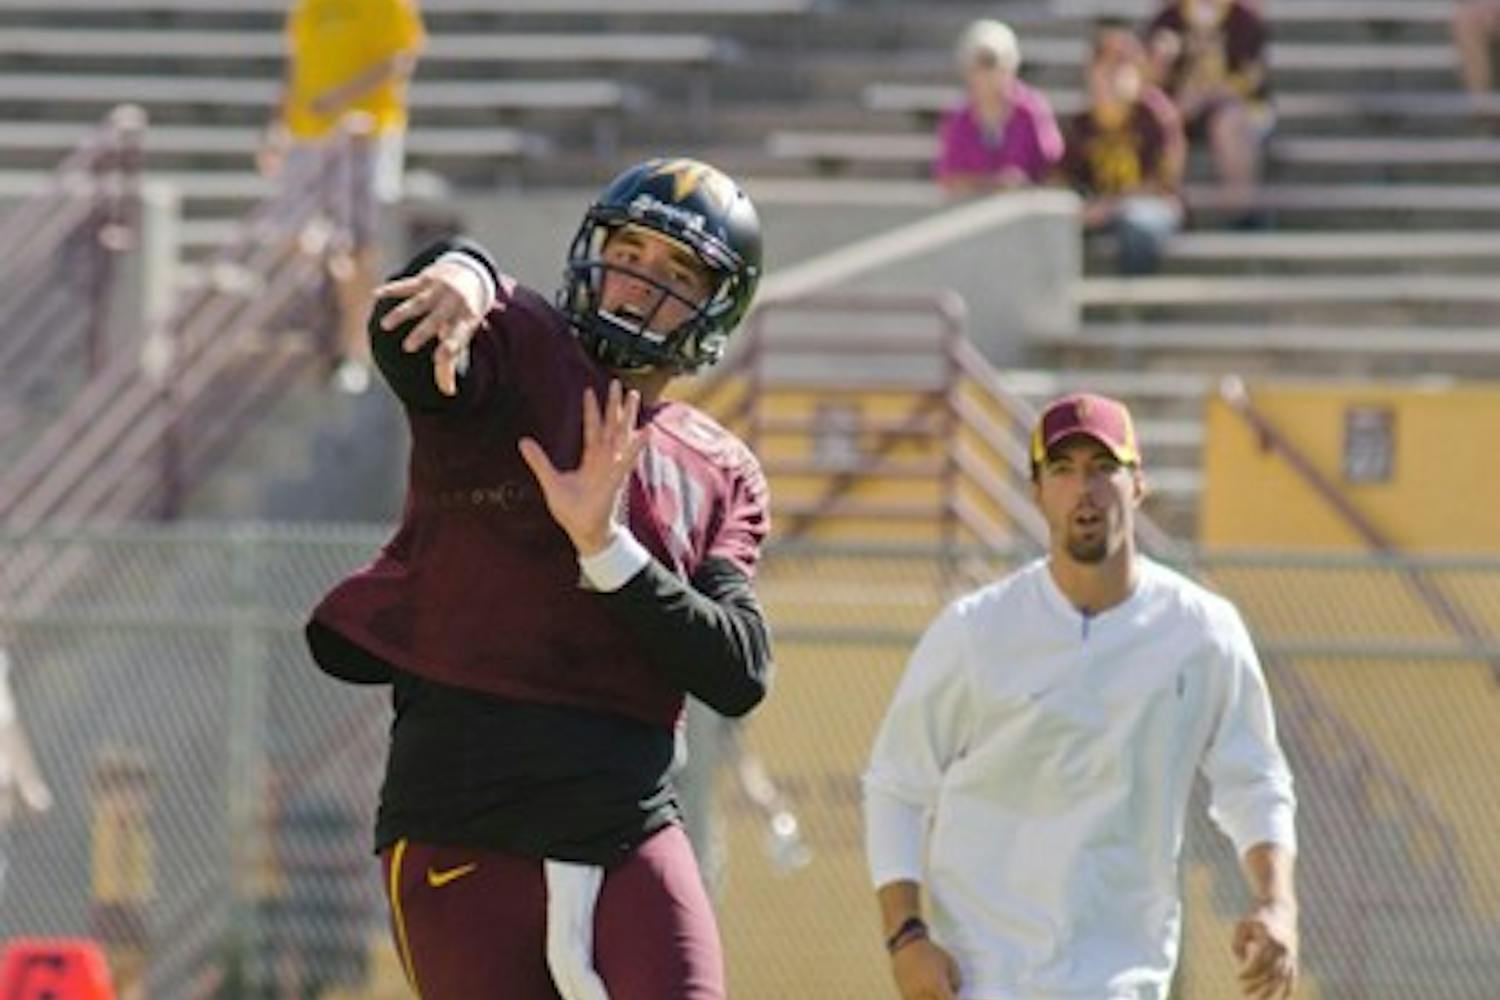 TUNING UP: Junior quarterback Brock Osweiler fires a pass during Saturday’s intrasquad scrimmage. Osweiler, ASU’s undisputed starter this season, finished the game 10-for-15 for 137 yards and one touchdown. (Lisa Bartoli)